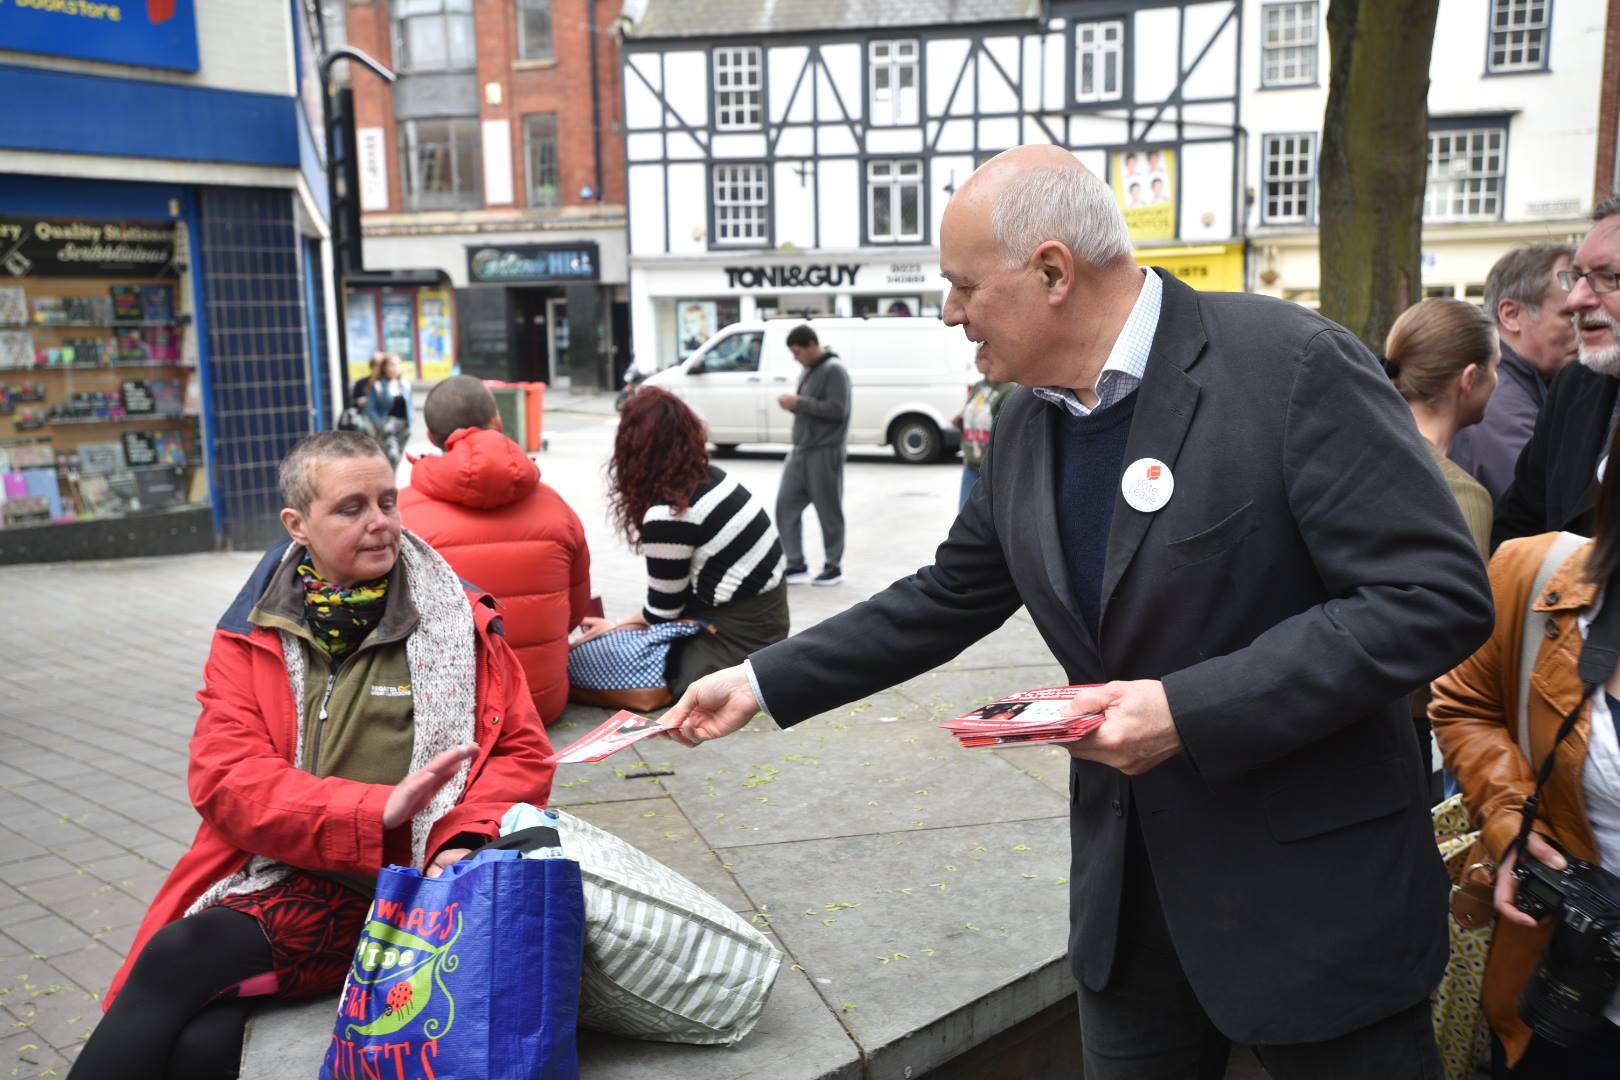 Iain Duncan Smith leafleting on Lincoln High Street. Photo: Steve Smailes for The Lincolnite